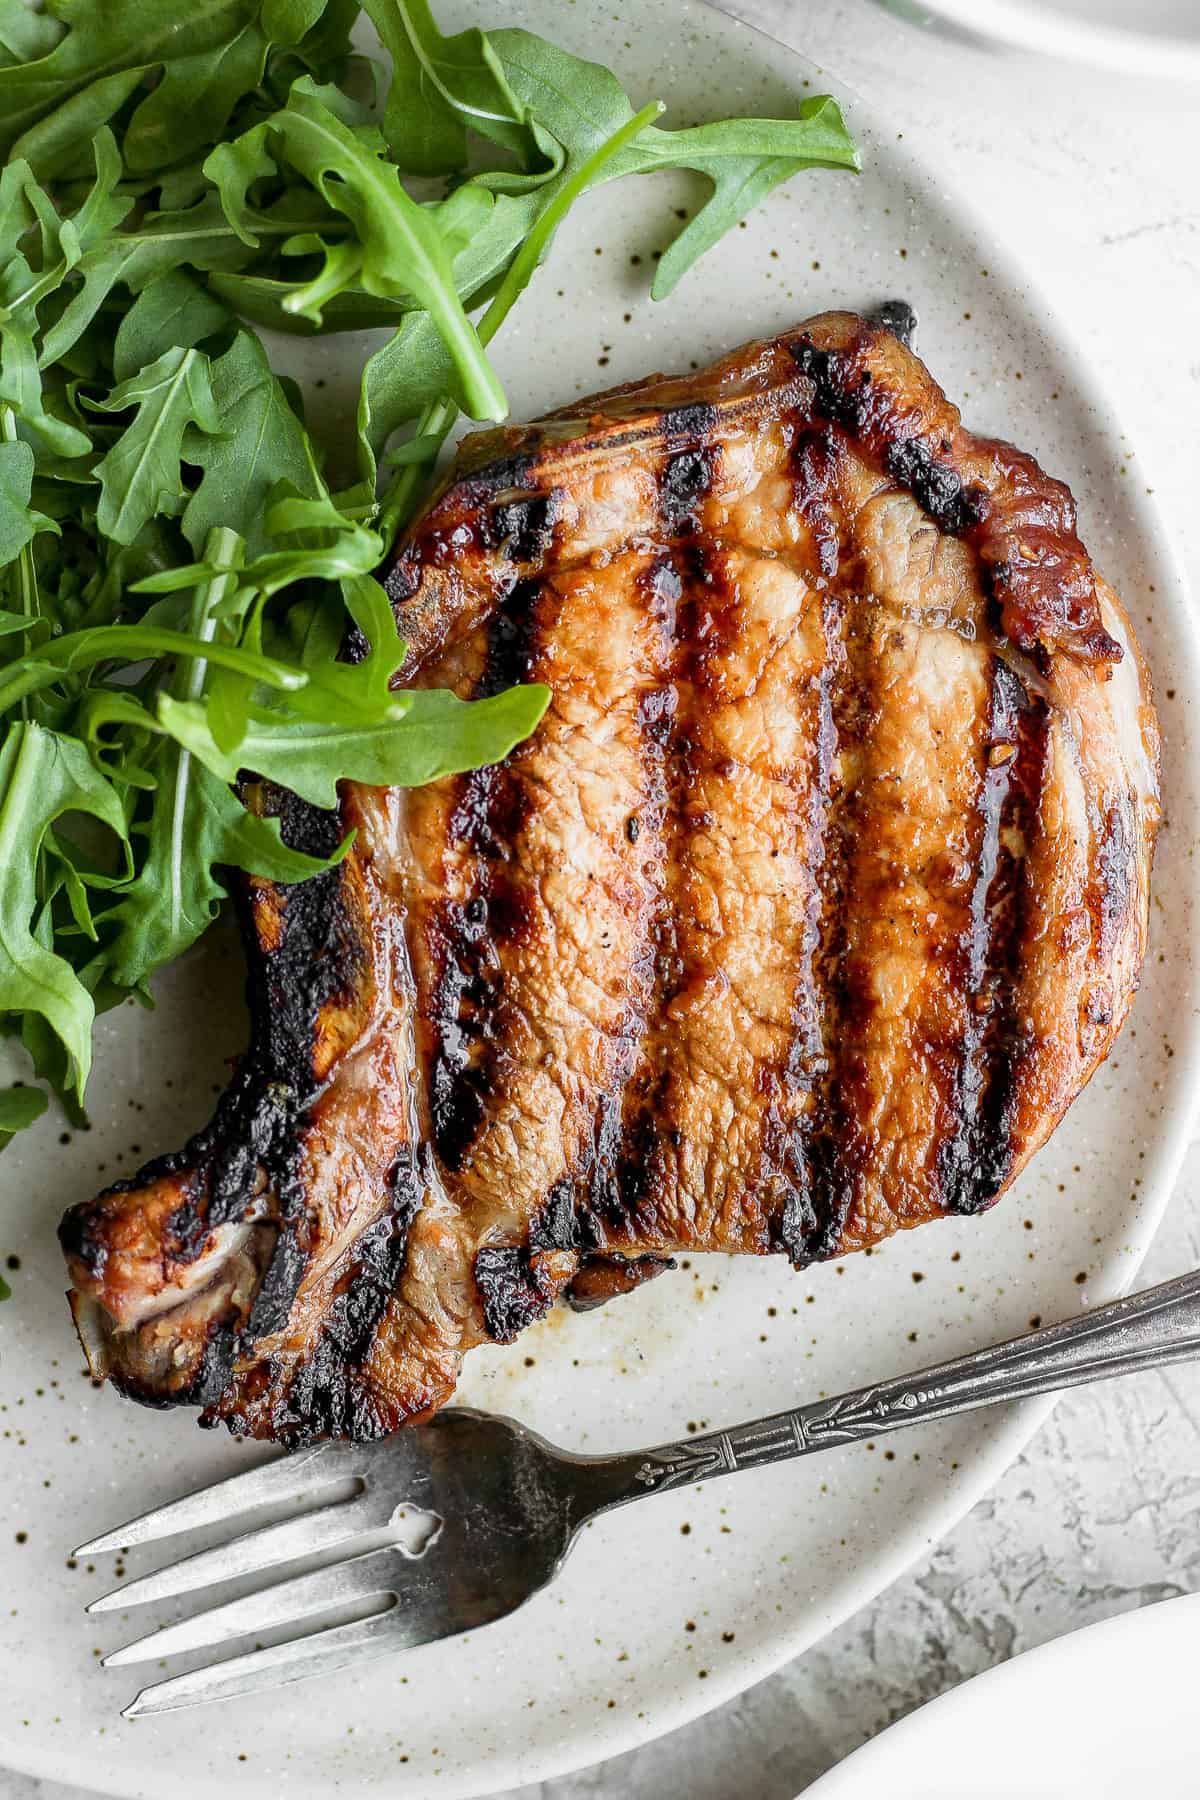 How to Grill Pork Chops (Juicy Grilled Pork Chops) - Fit Foodie Finds